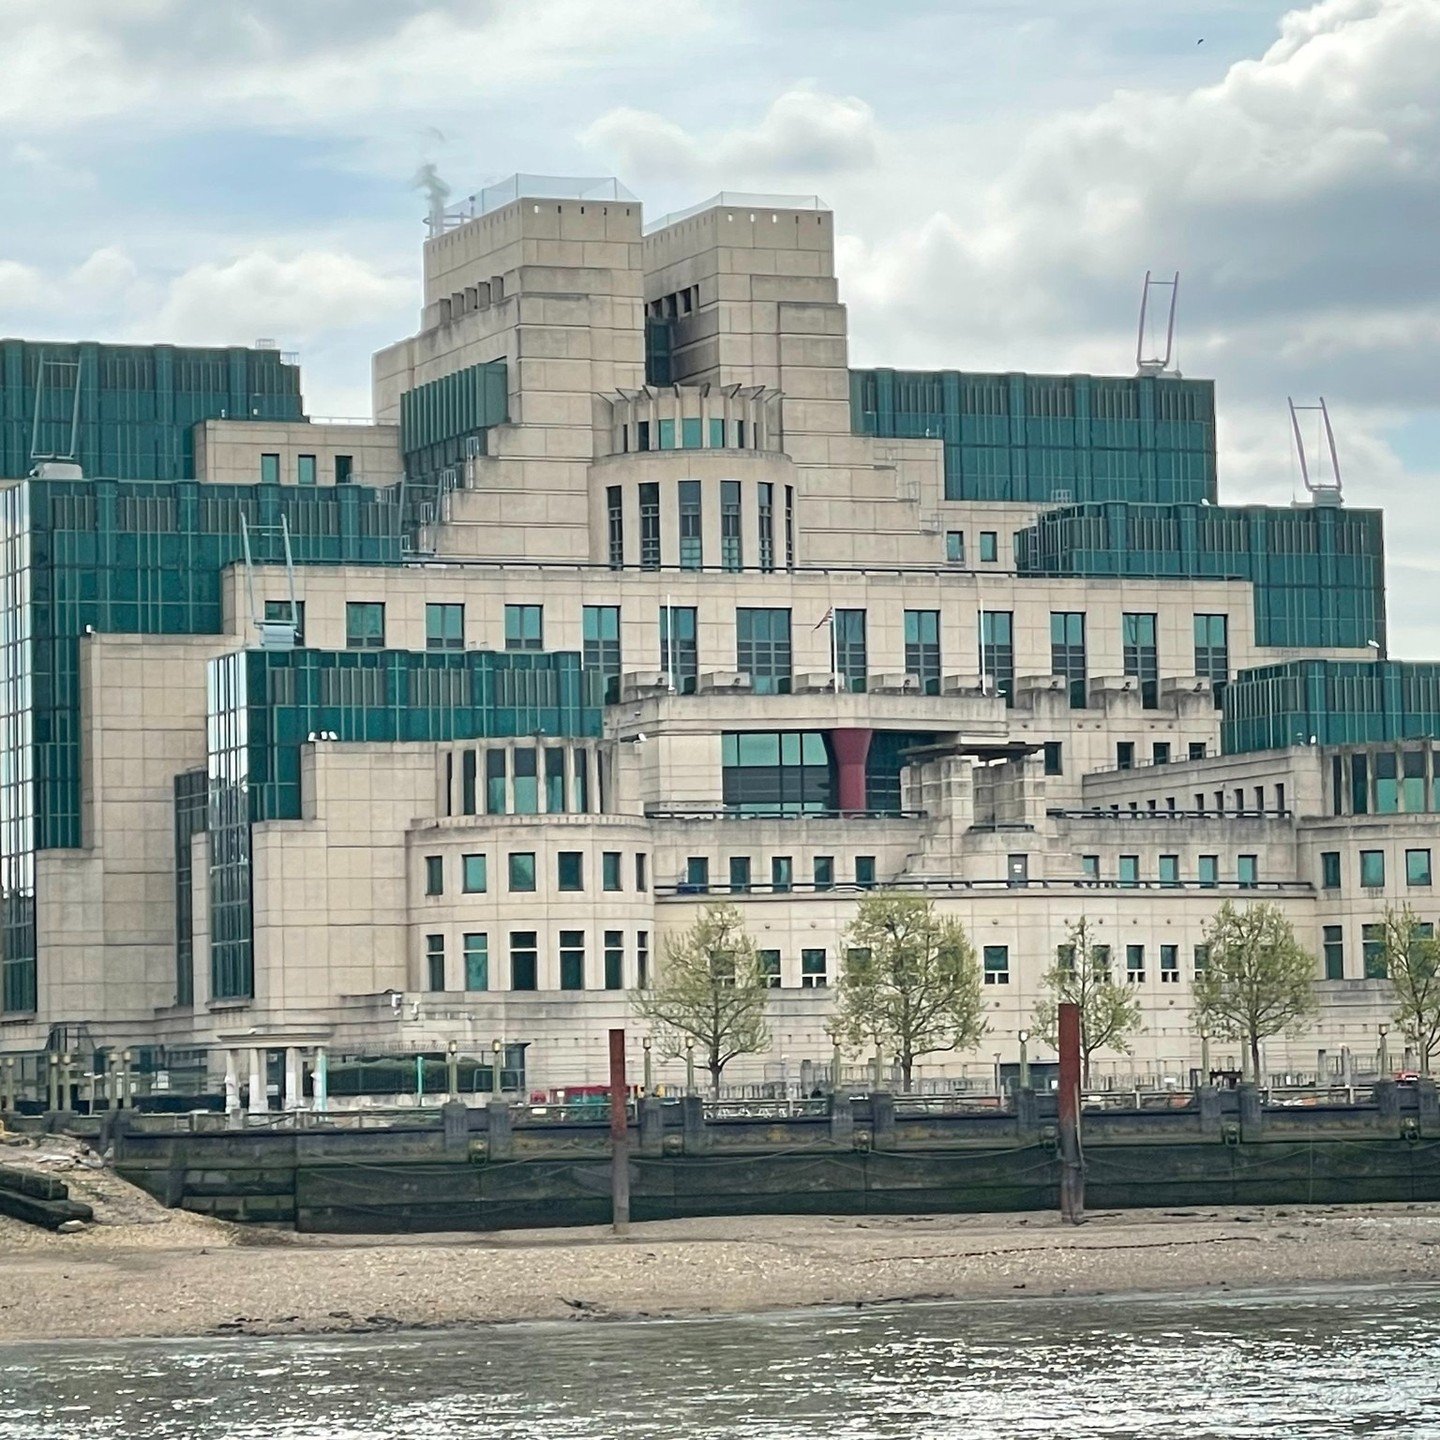 On a recent visit to London I passed by the UK's SIS (MI6) building located at Vauxhall Cross on The Thames River. 

A deliberately public face of UK Intelligence, the building has been subject to attack on a few occasions - RPG rockets launched by s